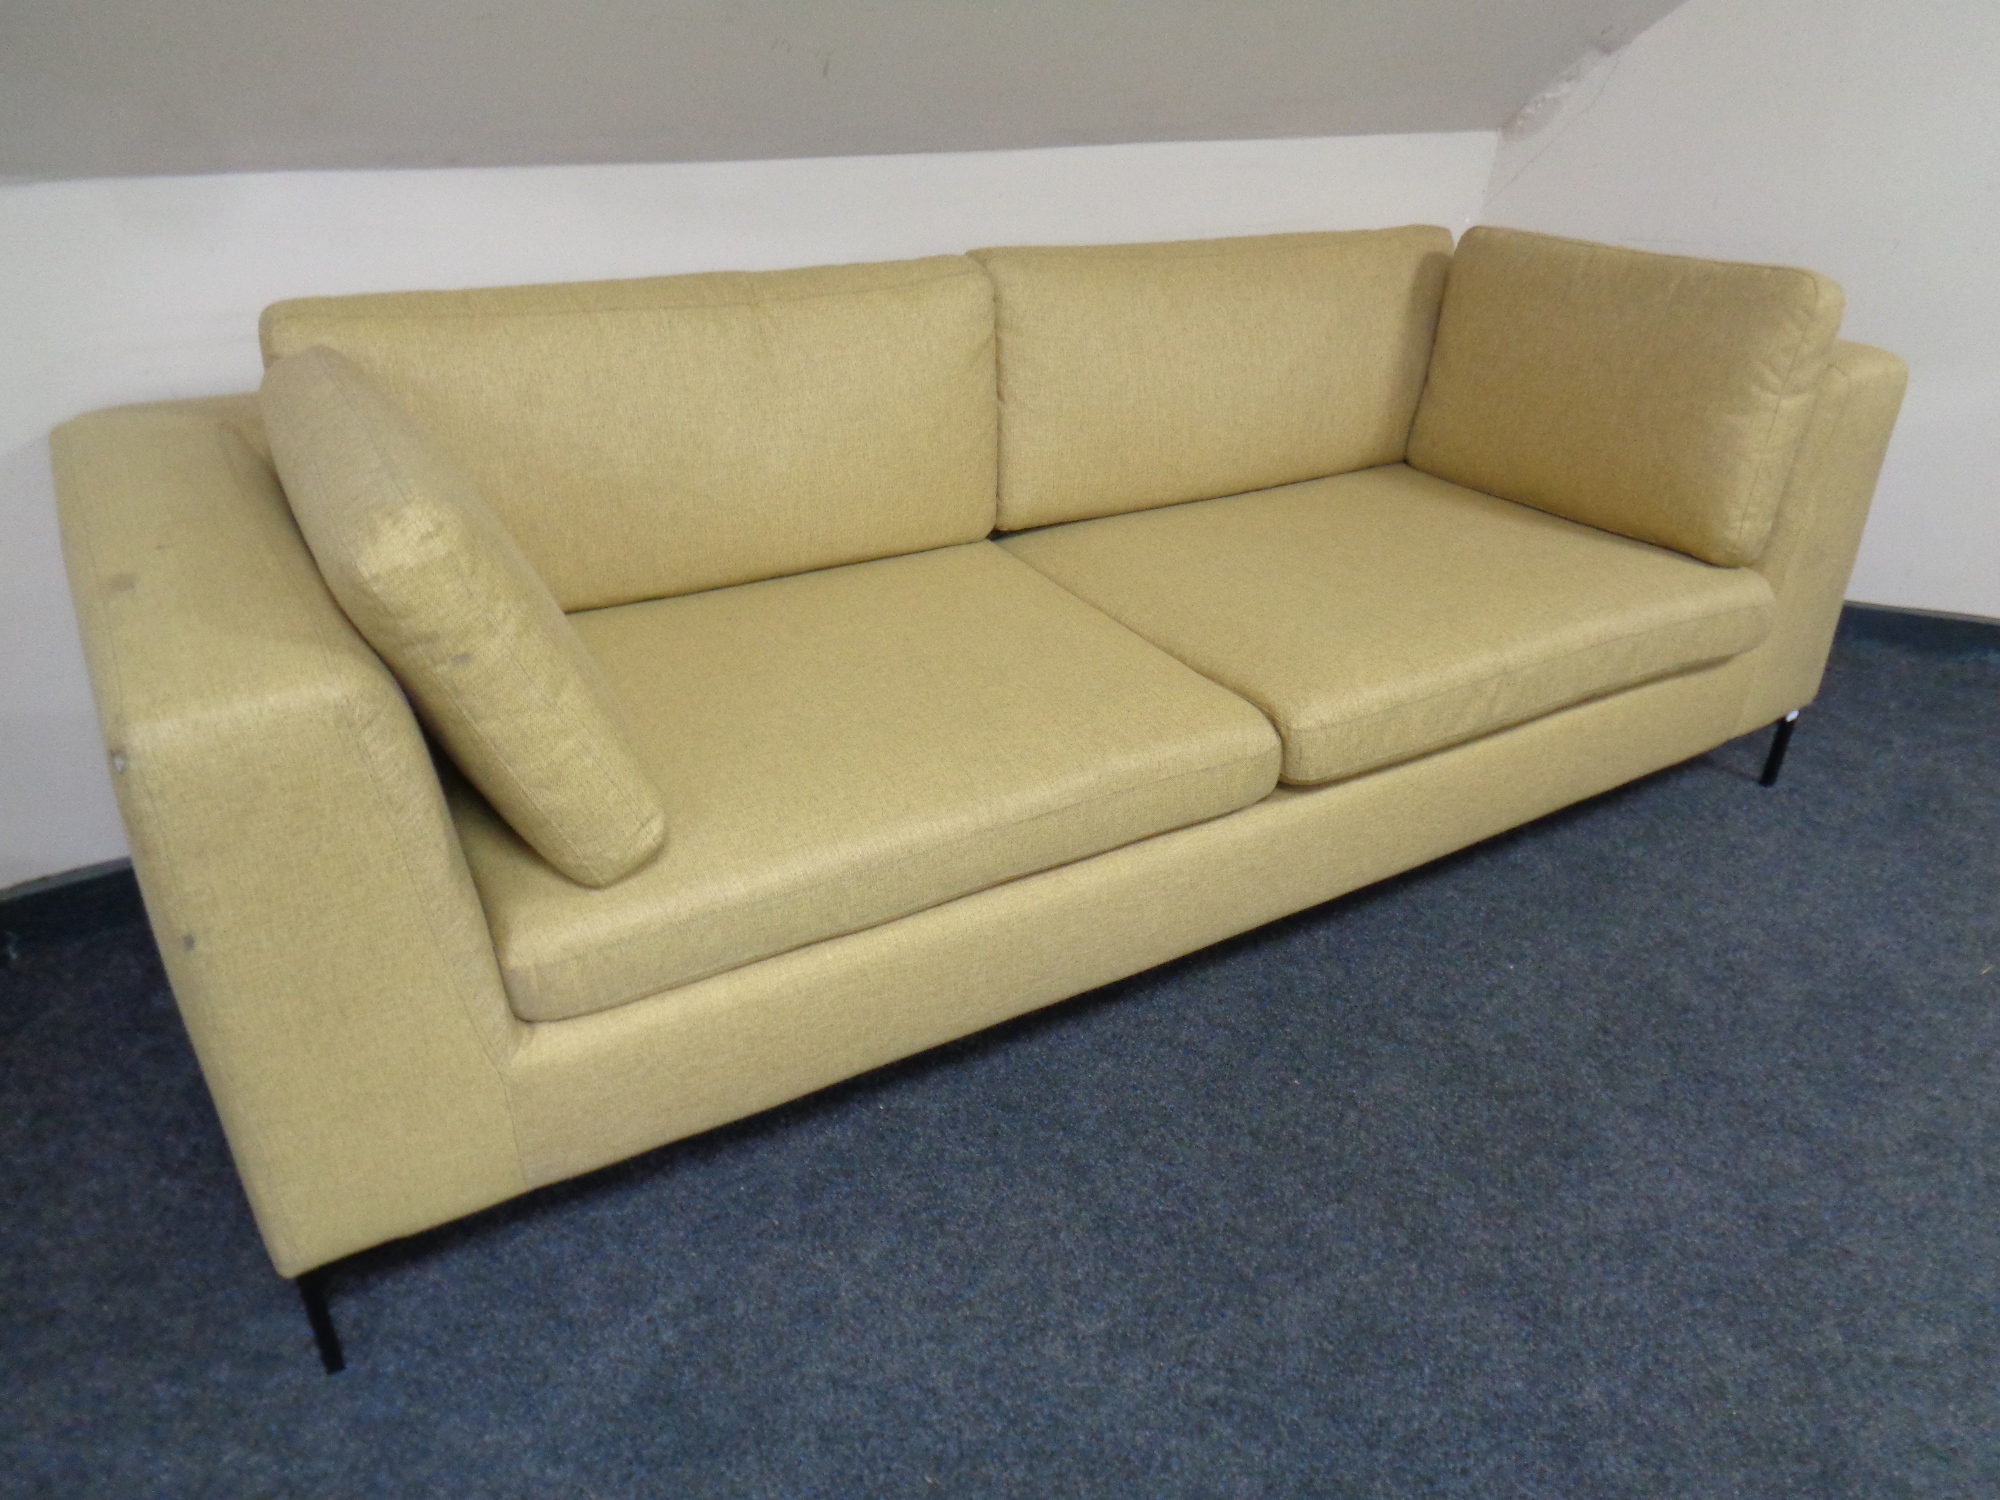 A contemporary three seater settee in yellow fabric (Af)